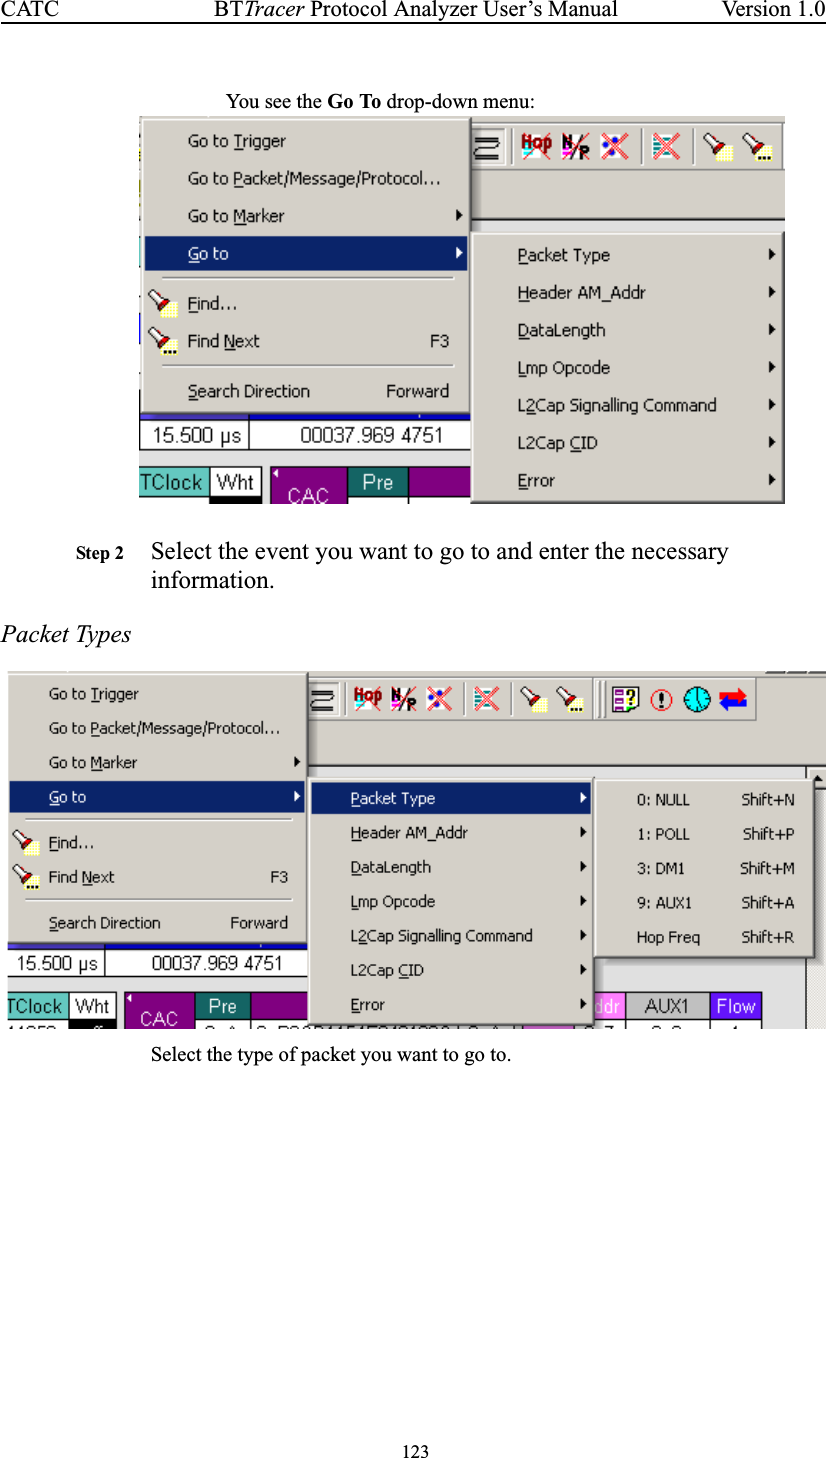 123BTTracer Protocol Analyzer User’s ManualCATC Version 1.0You see th e Go To drop-down menu:Step 2 Select the event you want to go to and enter the necessaryinformation.Packet TypesSelect the type of packet you want to go to.